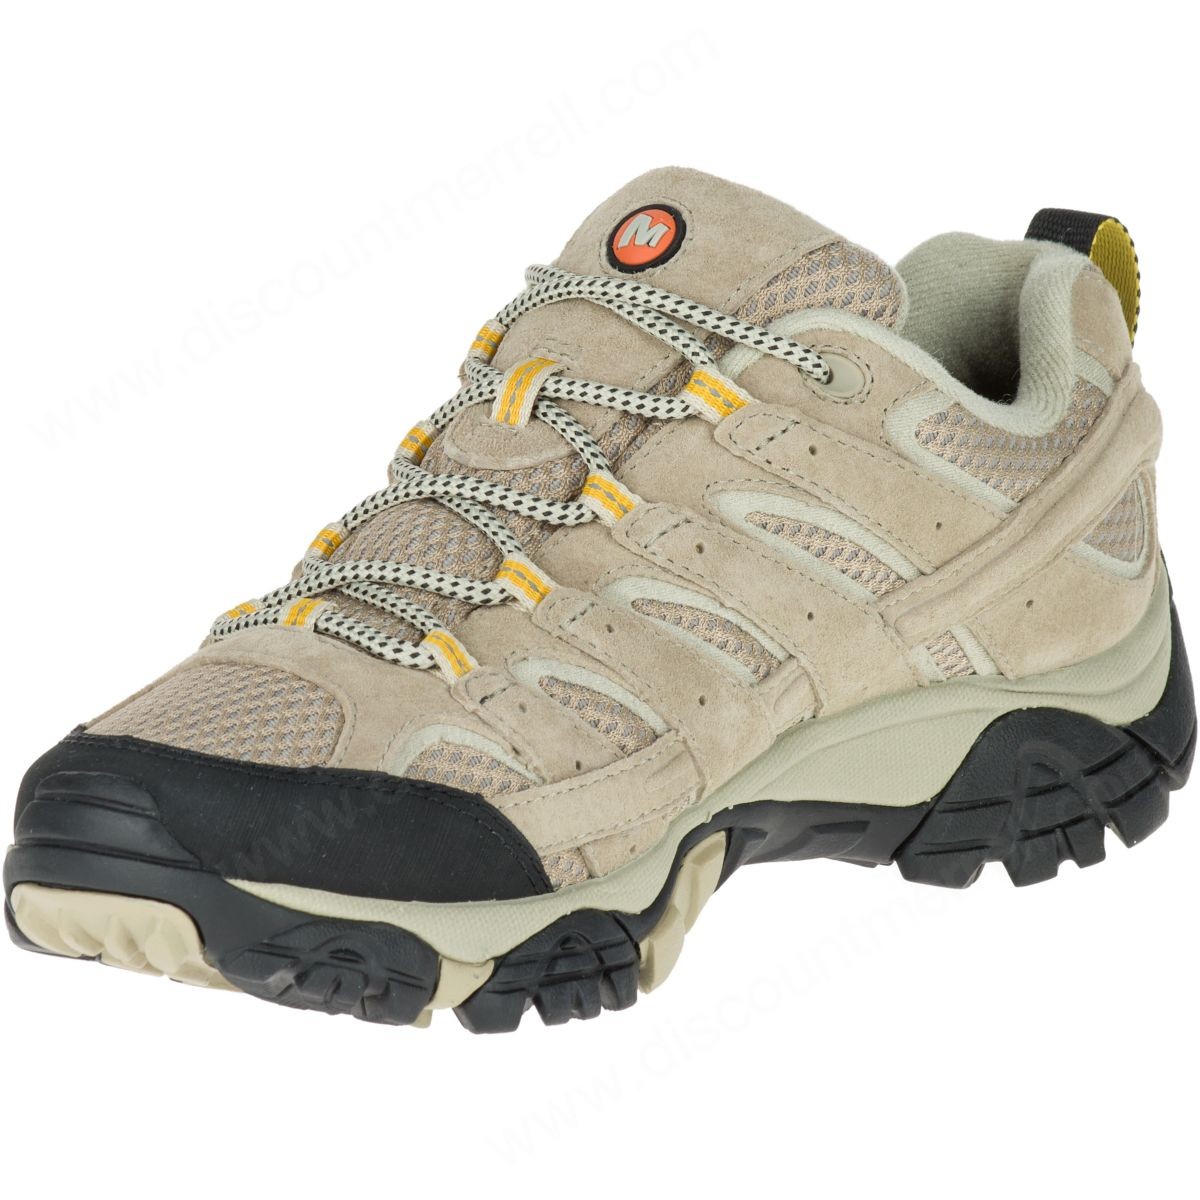 Merrell Woman's Moab Mother Of All Boots™ Ventilator Wide Width Taupe - -5